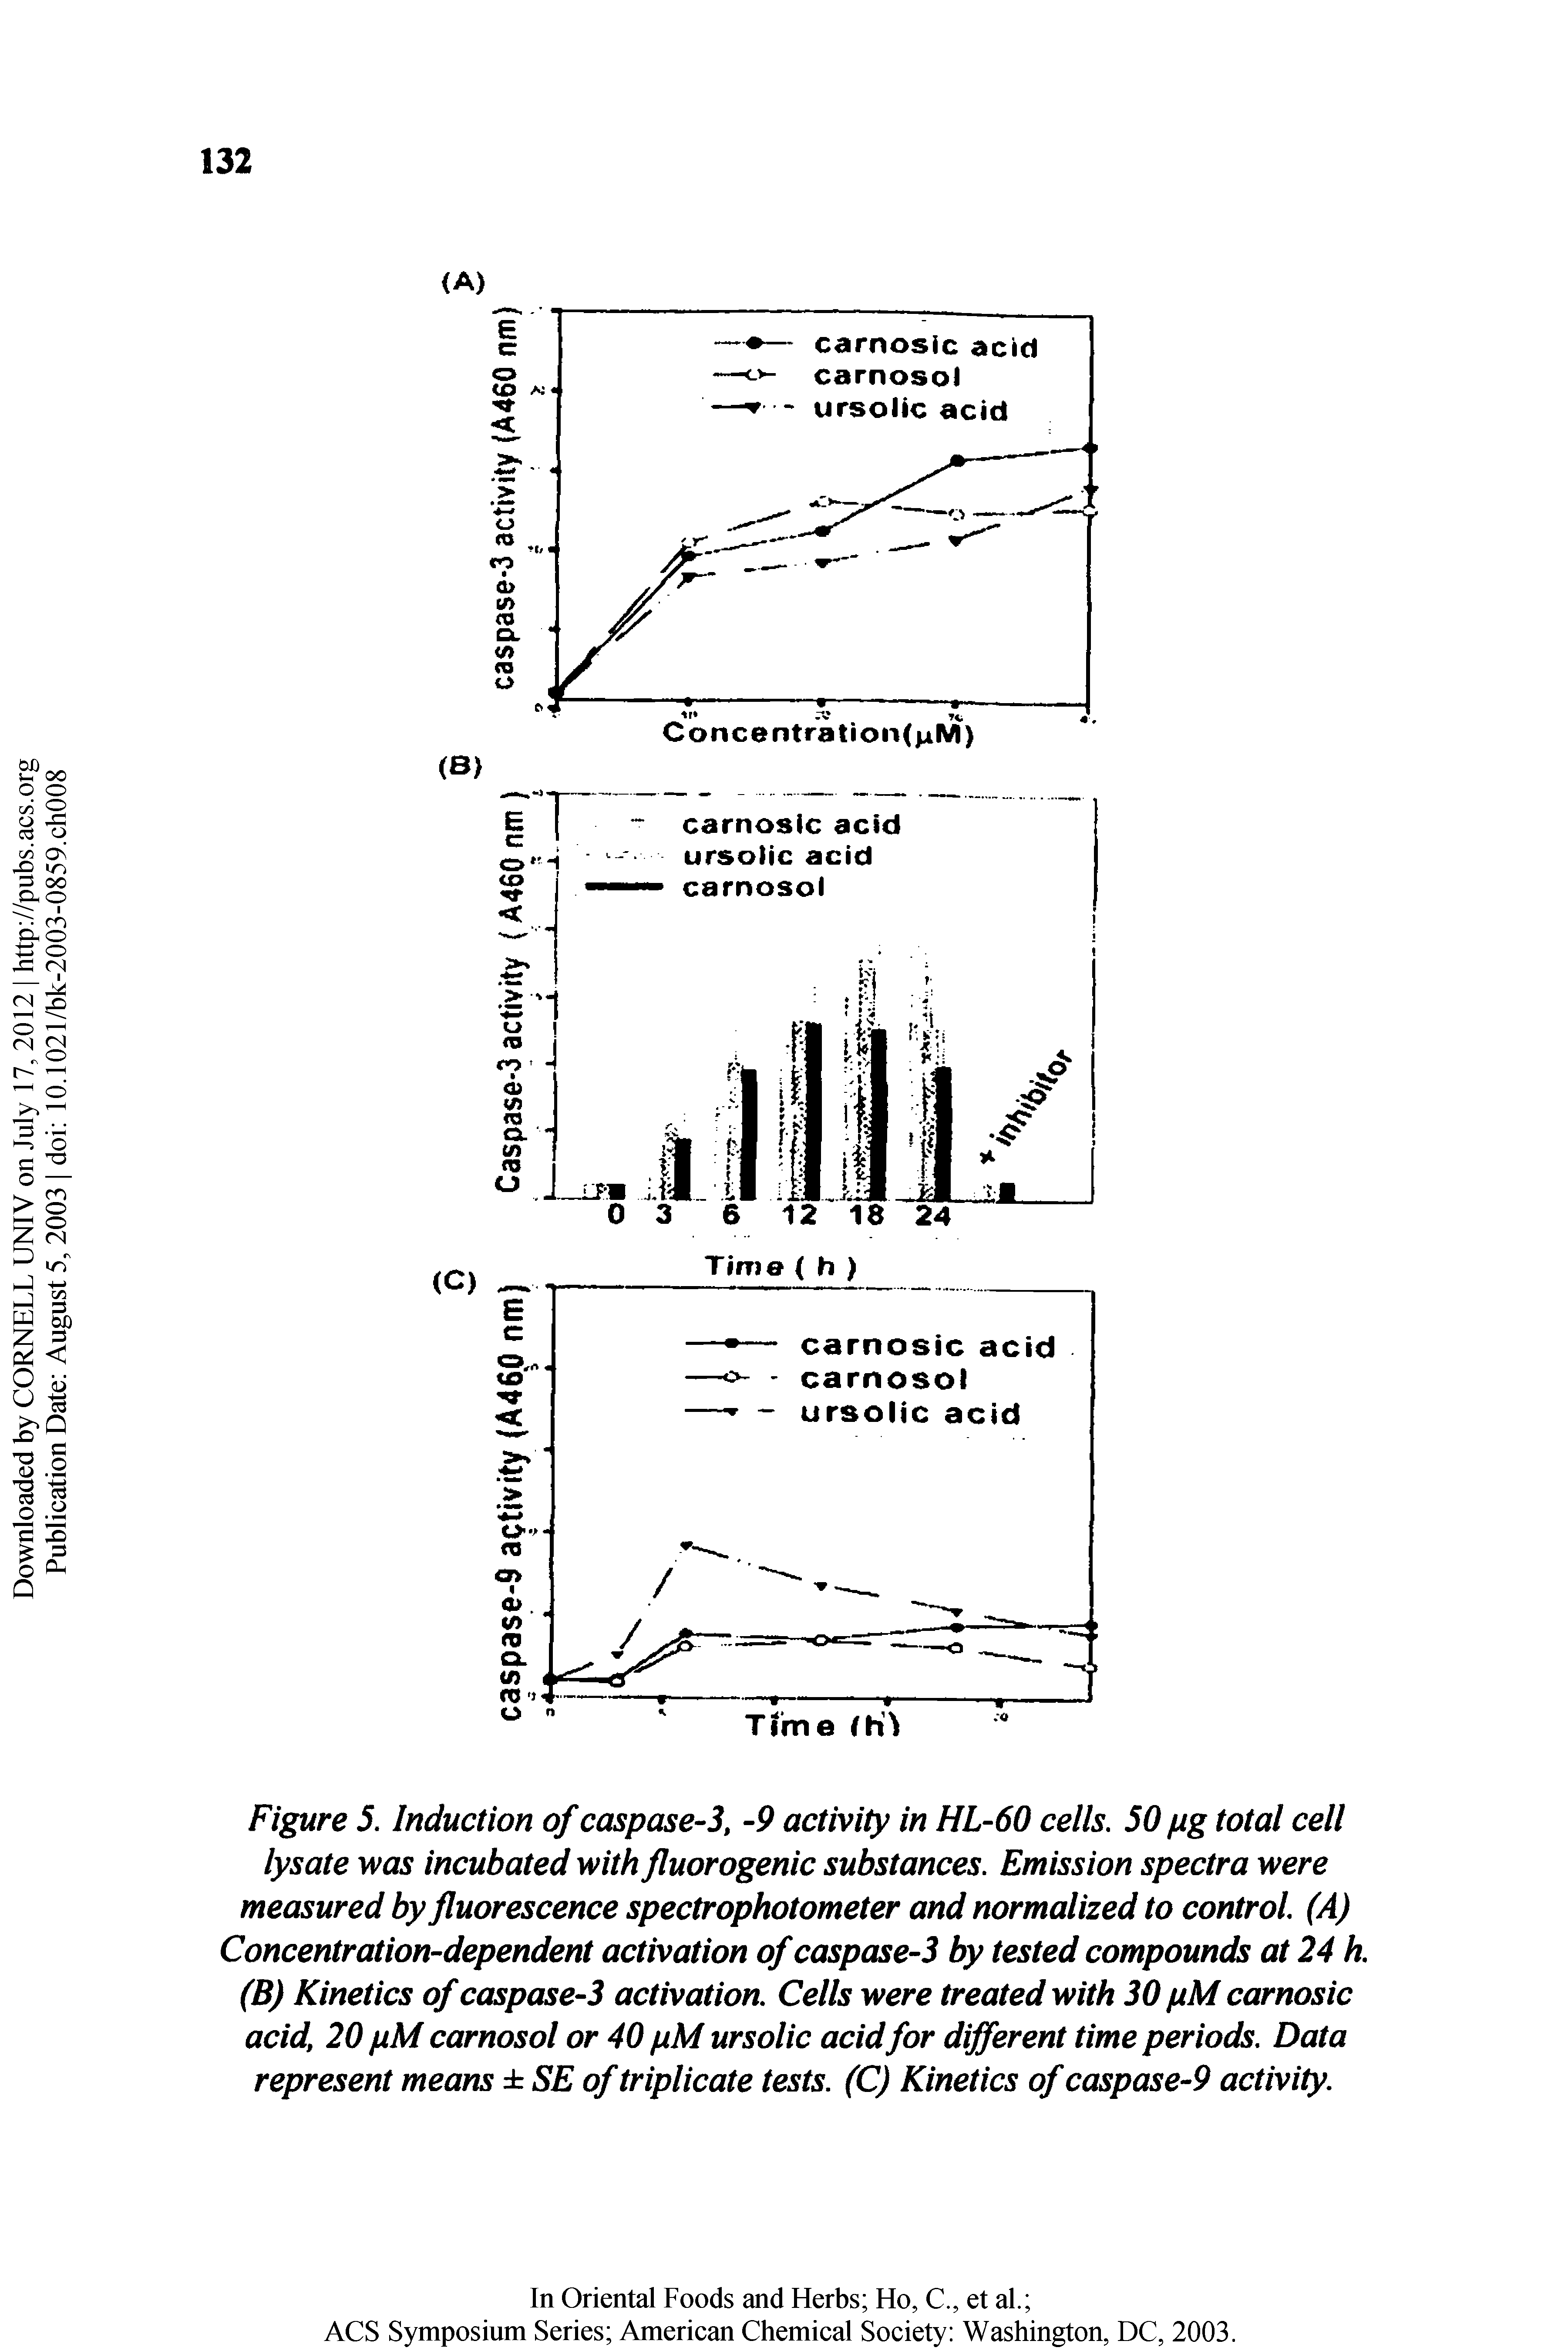 Figure 5. Induction of caspase-3, -9 activity in HL-60 cells. 50 pg total cell lysate was incubated with fluorogenic substances. Emission spectra were measured by fluorescence spectrophotometer and normalized to control. (A) Concentration-dependent activation of caspase-3 by tested compounds at 24 h. (B) Kinetics of caspase-3 activation. Cells were treated with 30 pMcarnosic acid, 20 pM carnosol or 40 pM ursolic acid for different time periods. Data represent means SE of triplicate tests. (C) Kinetics of caspase-9 activity.